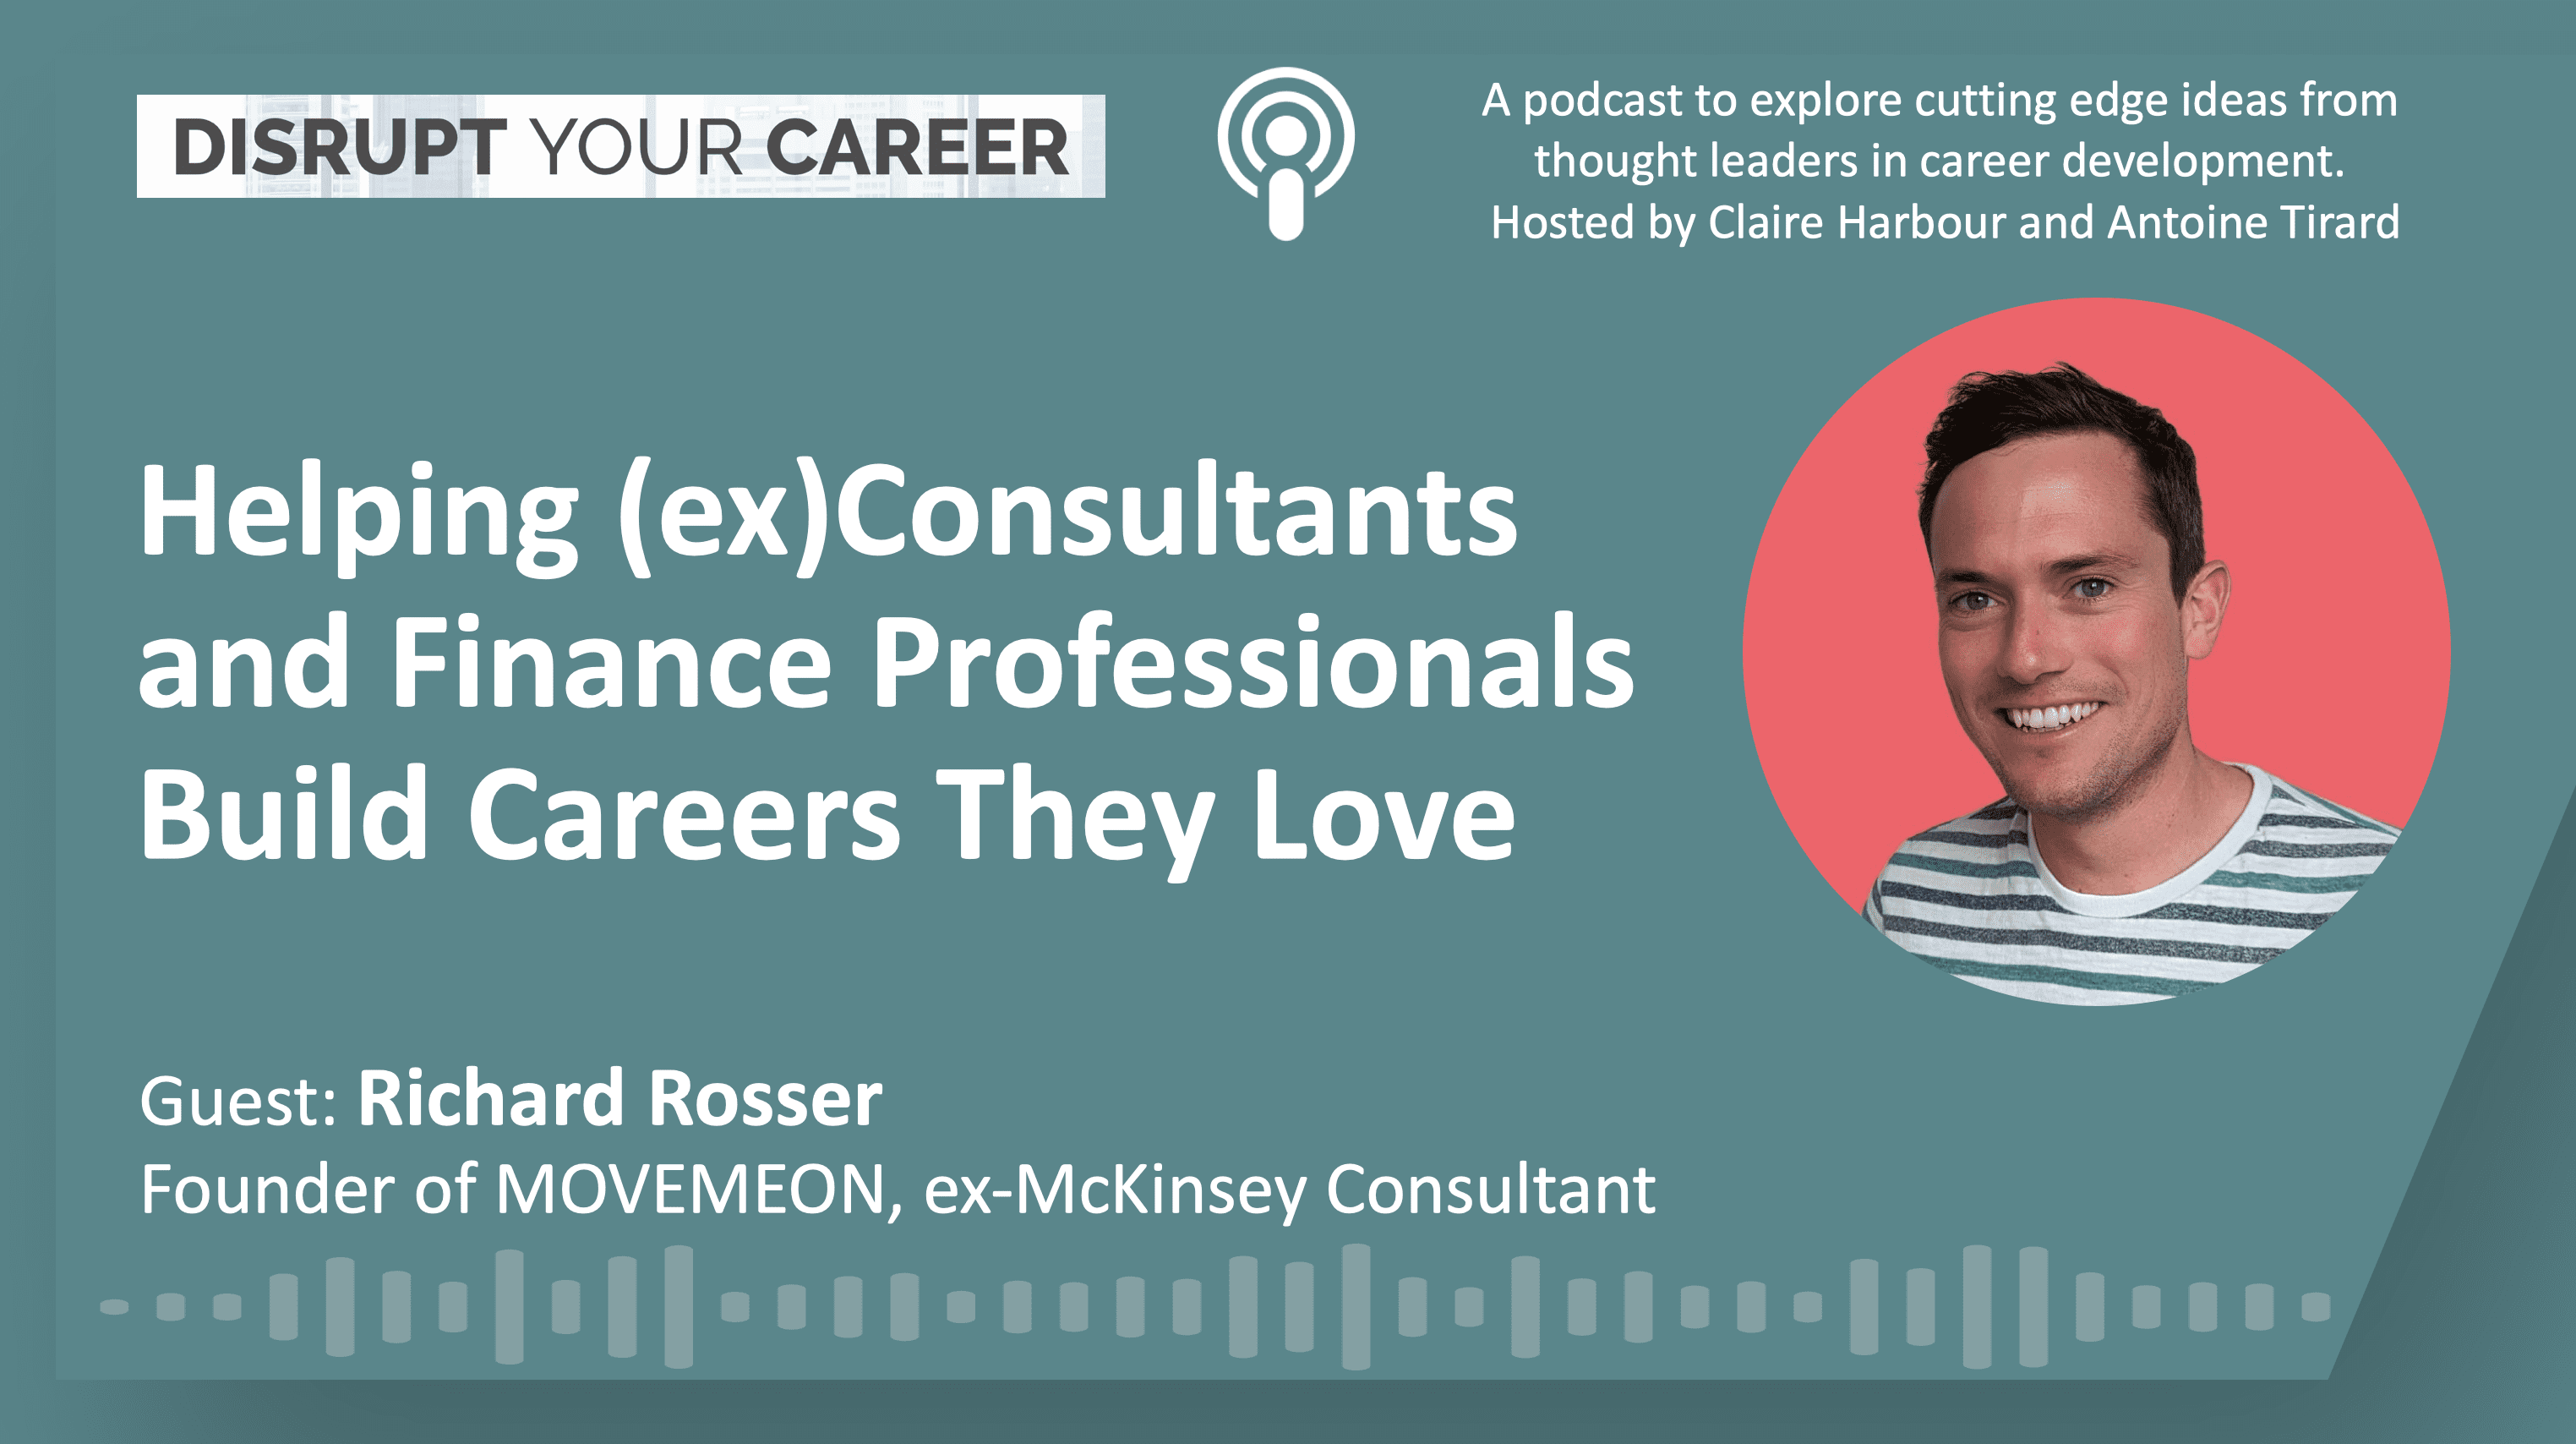 Helping (ex)Consultants and Finance Professionals Build Careers They Love